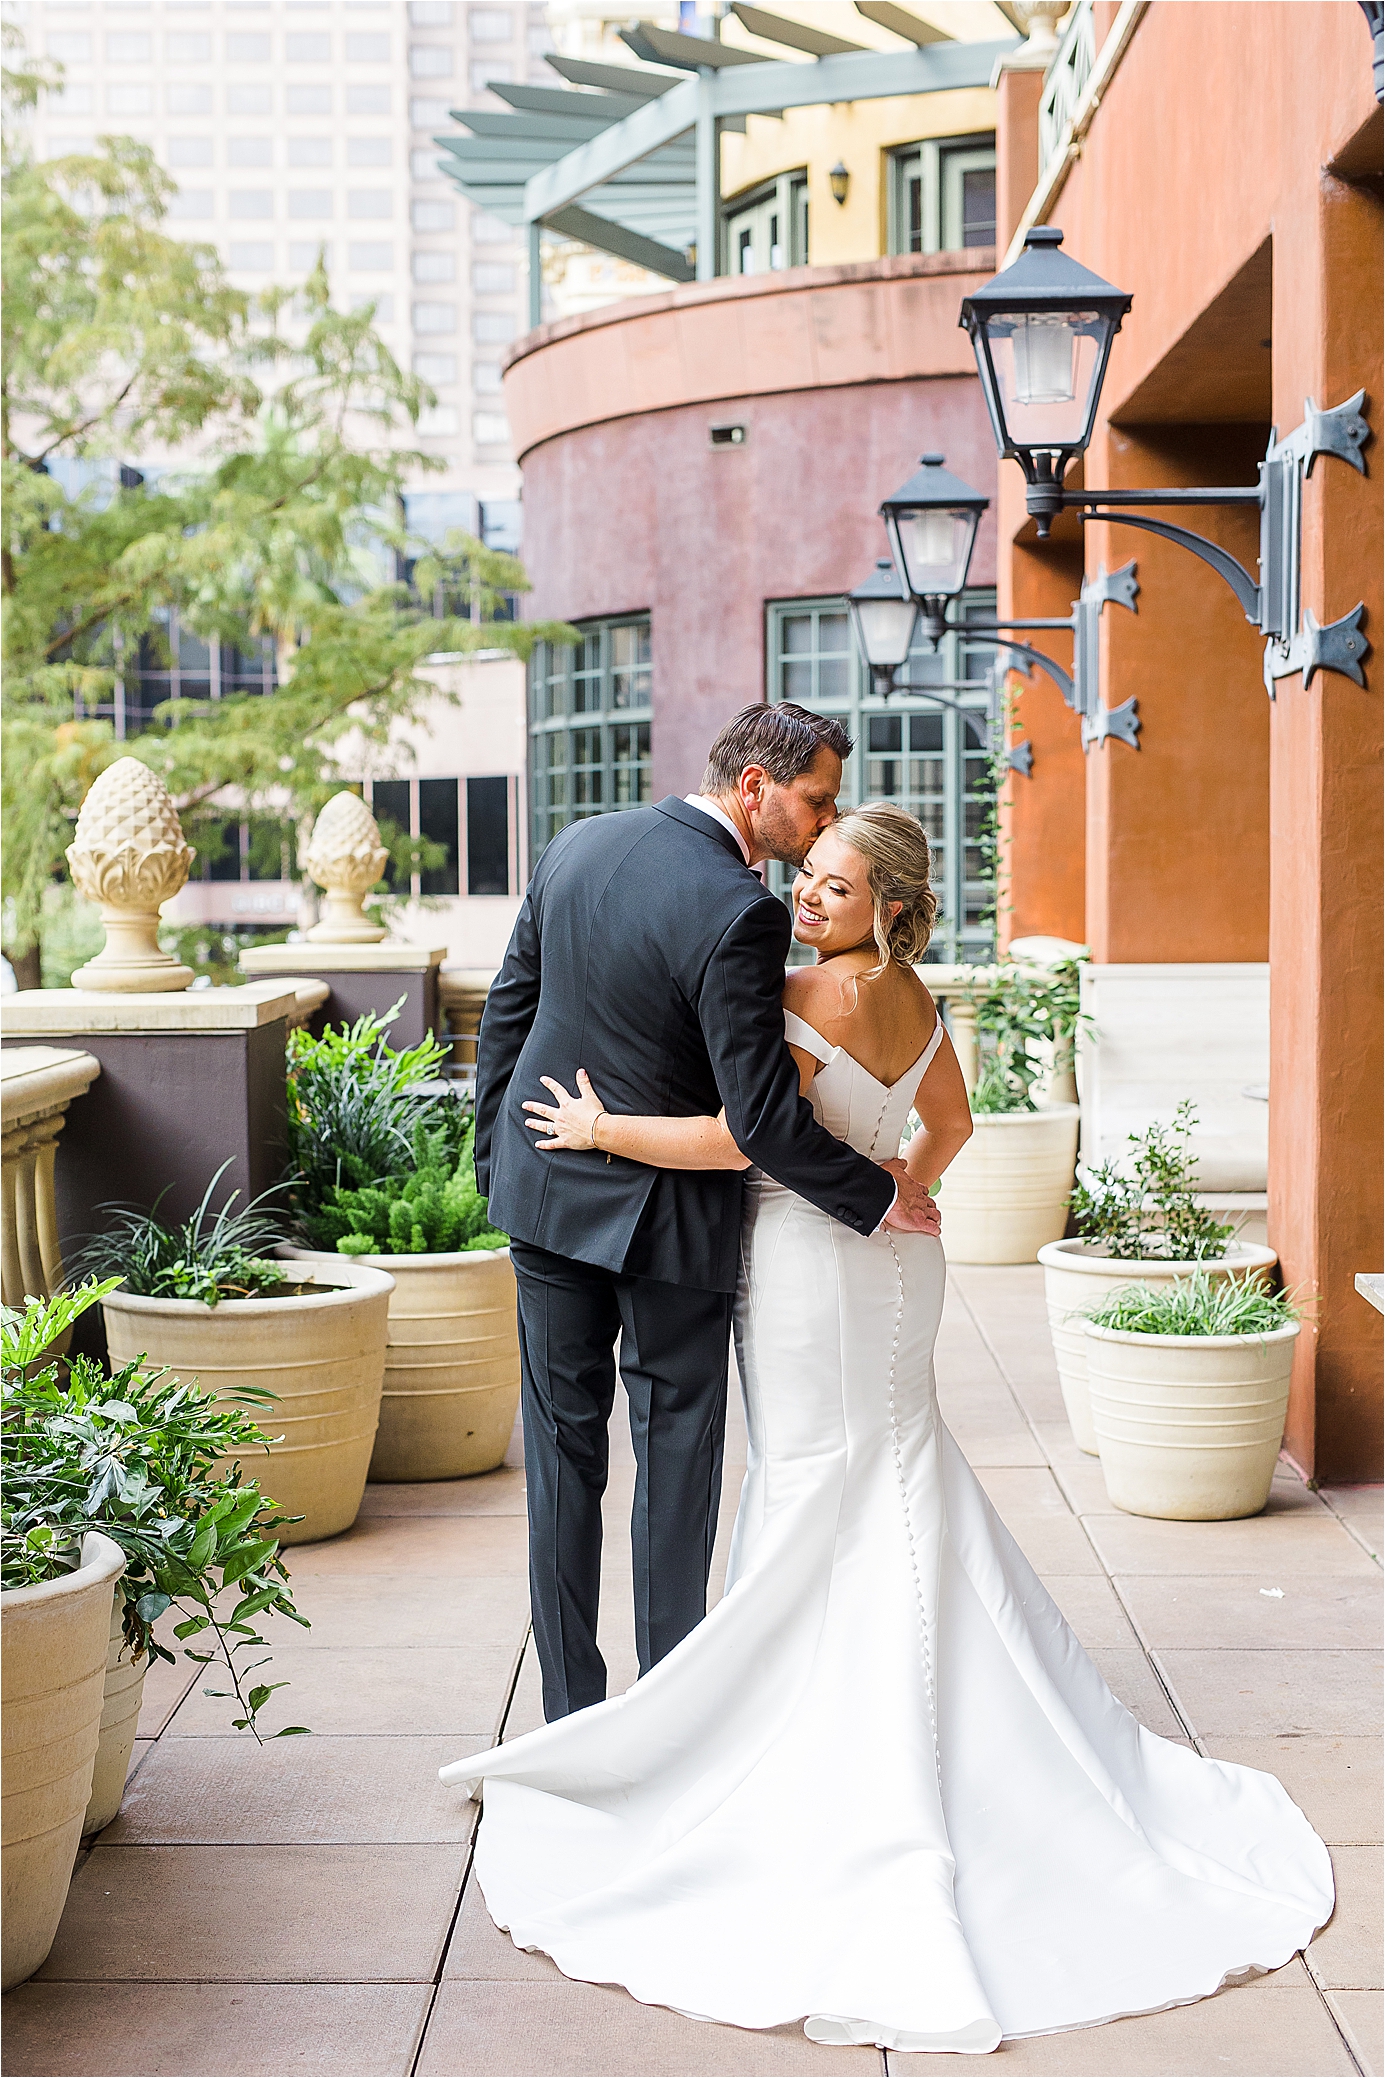 A groom kisses his bride on her forhead as we peek a the back of her dress on the Valencia Hotel Patio in San Antonio, Texas 